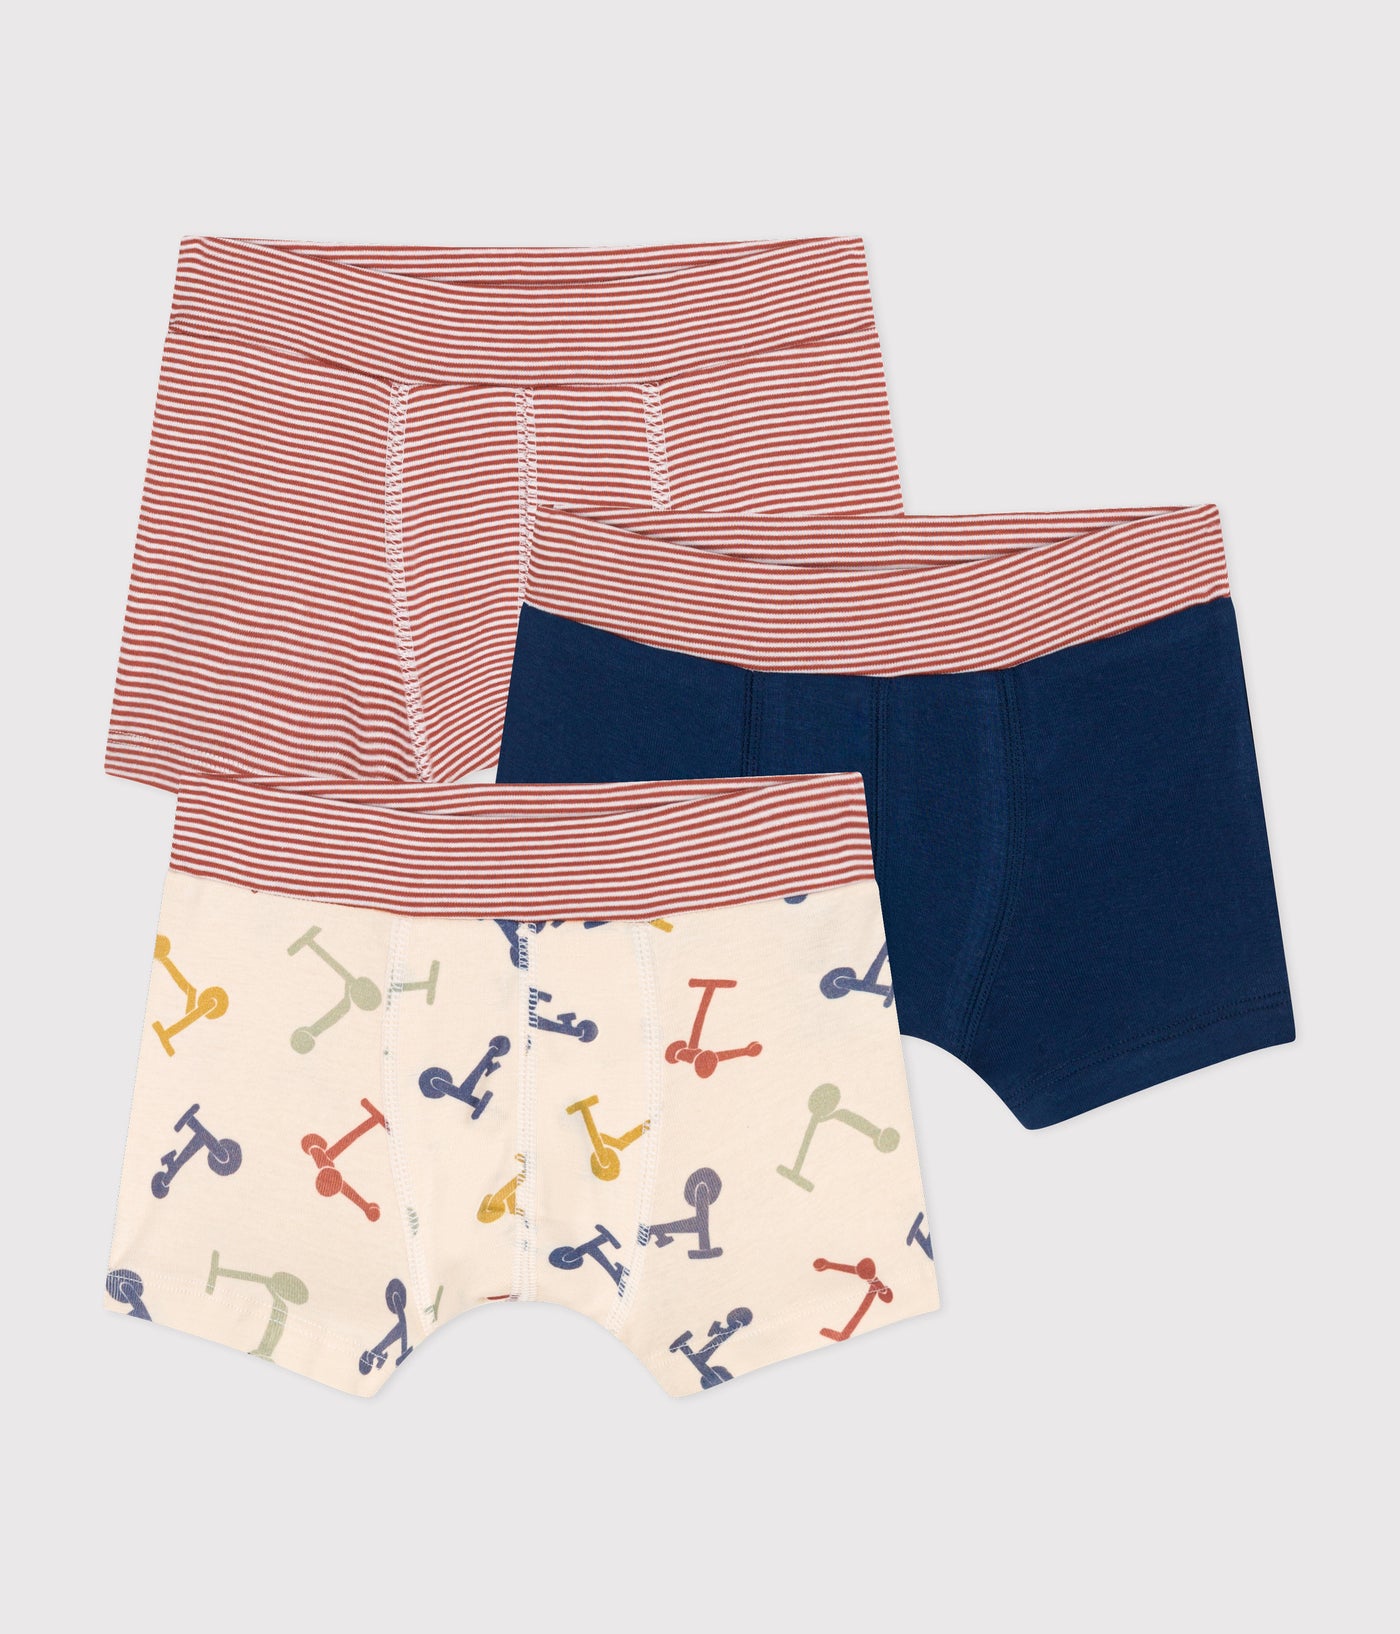 CHILDREN'S SCOOTER DESIGN COTTON BOXERS - 3-PACK